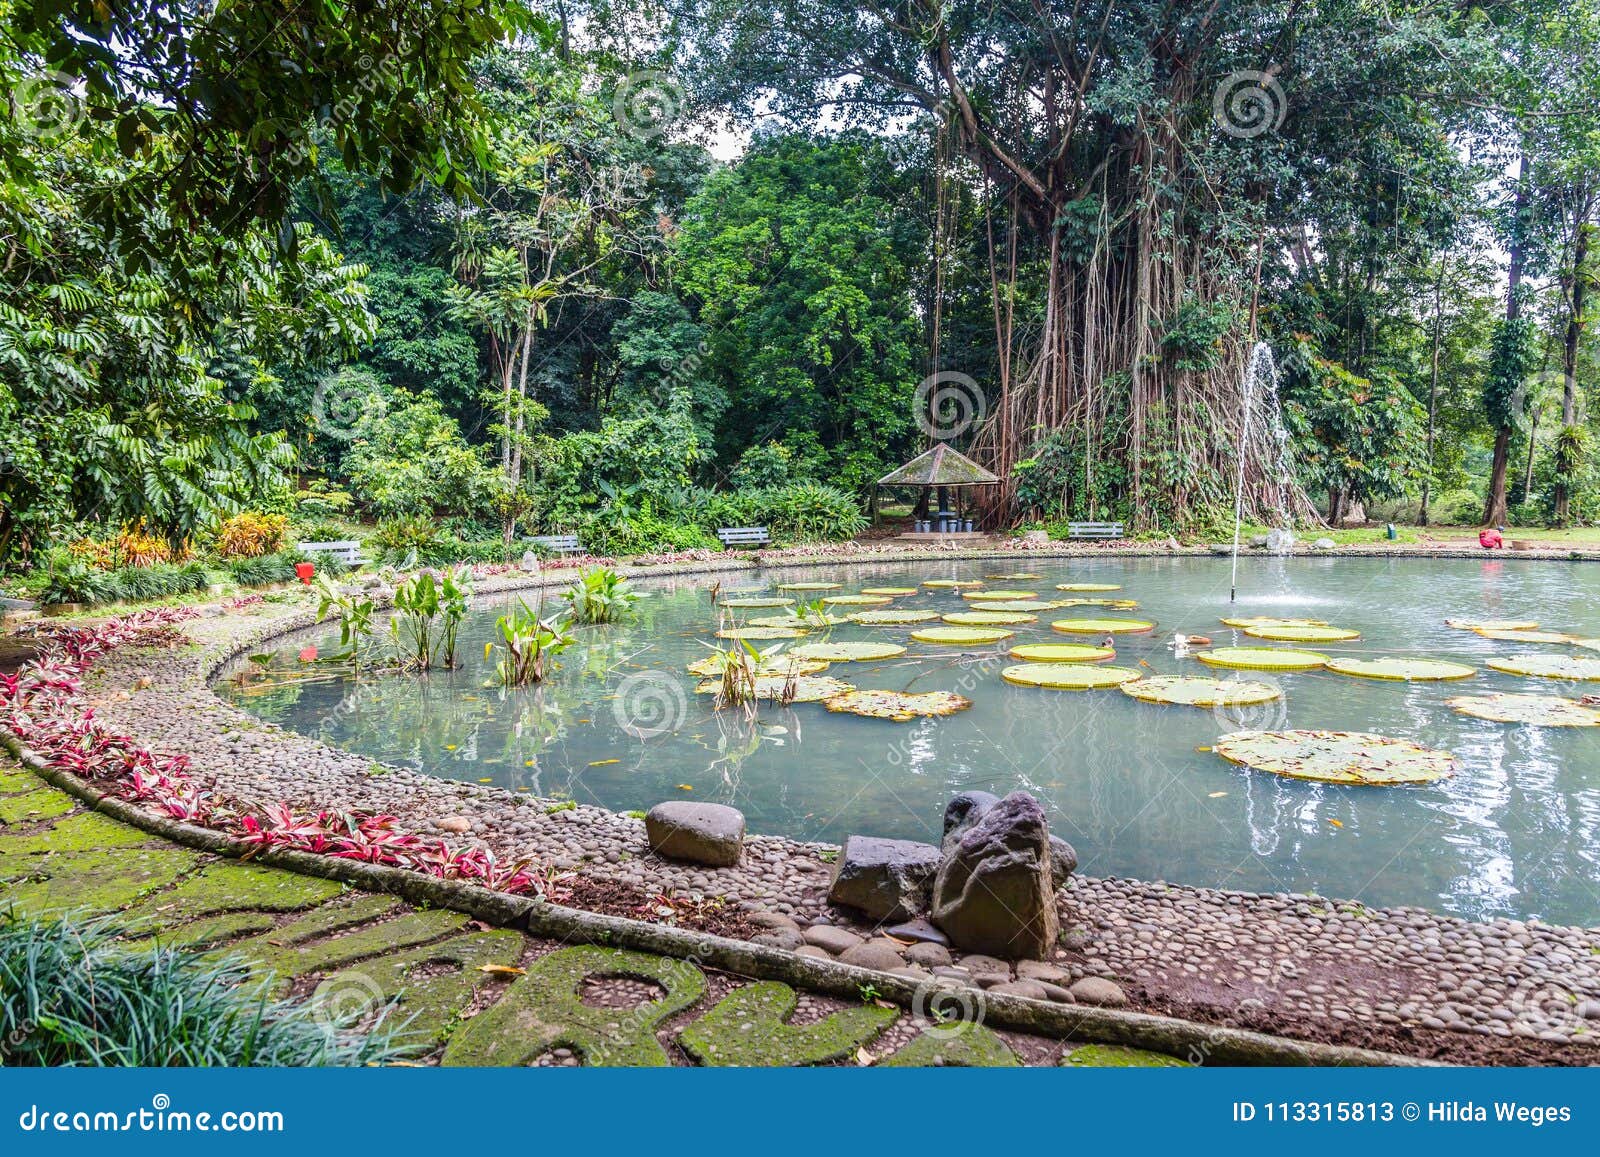 3 549 Bogor Photos Free Royalty Free Stock Photos From Dreamstime